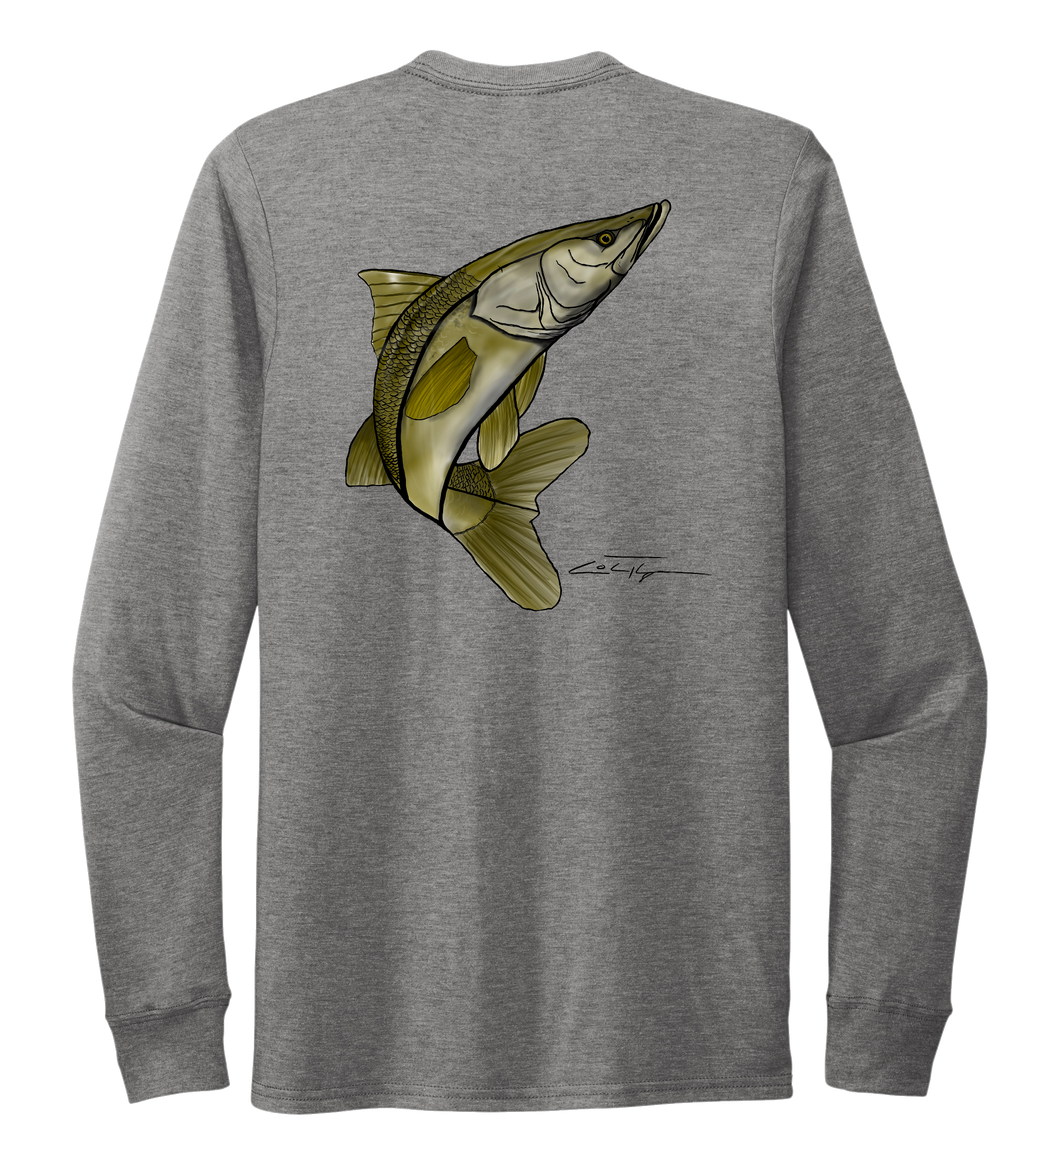 Colin Thompson, Snook, Crew Neck Long Sleeve T-Shirt in Oyster Grey